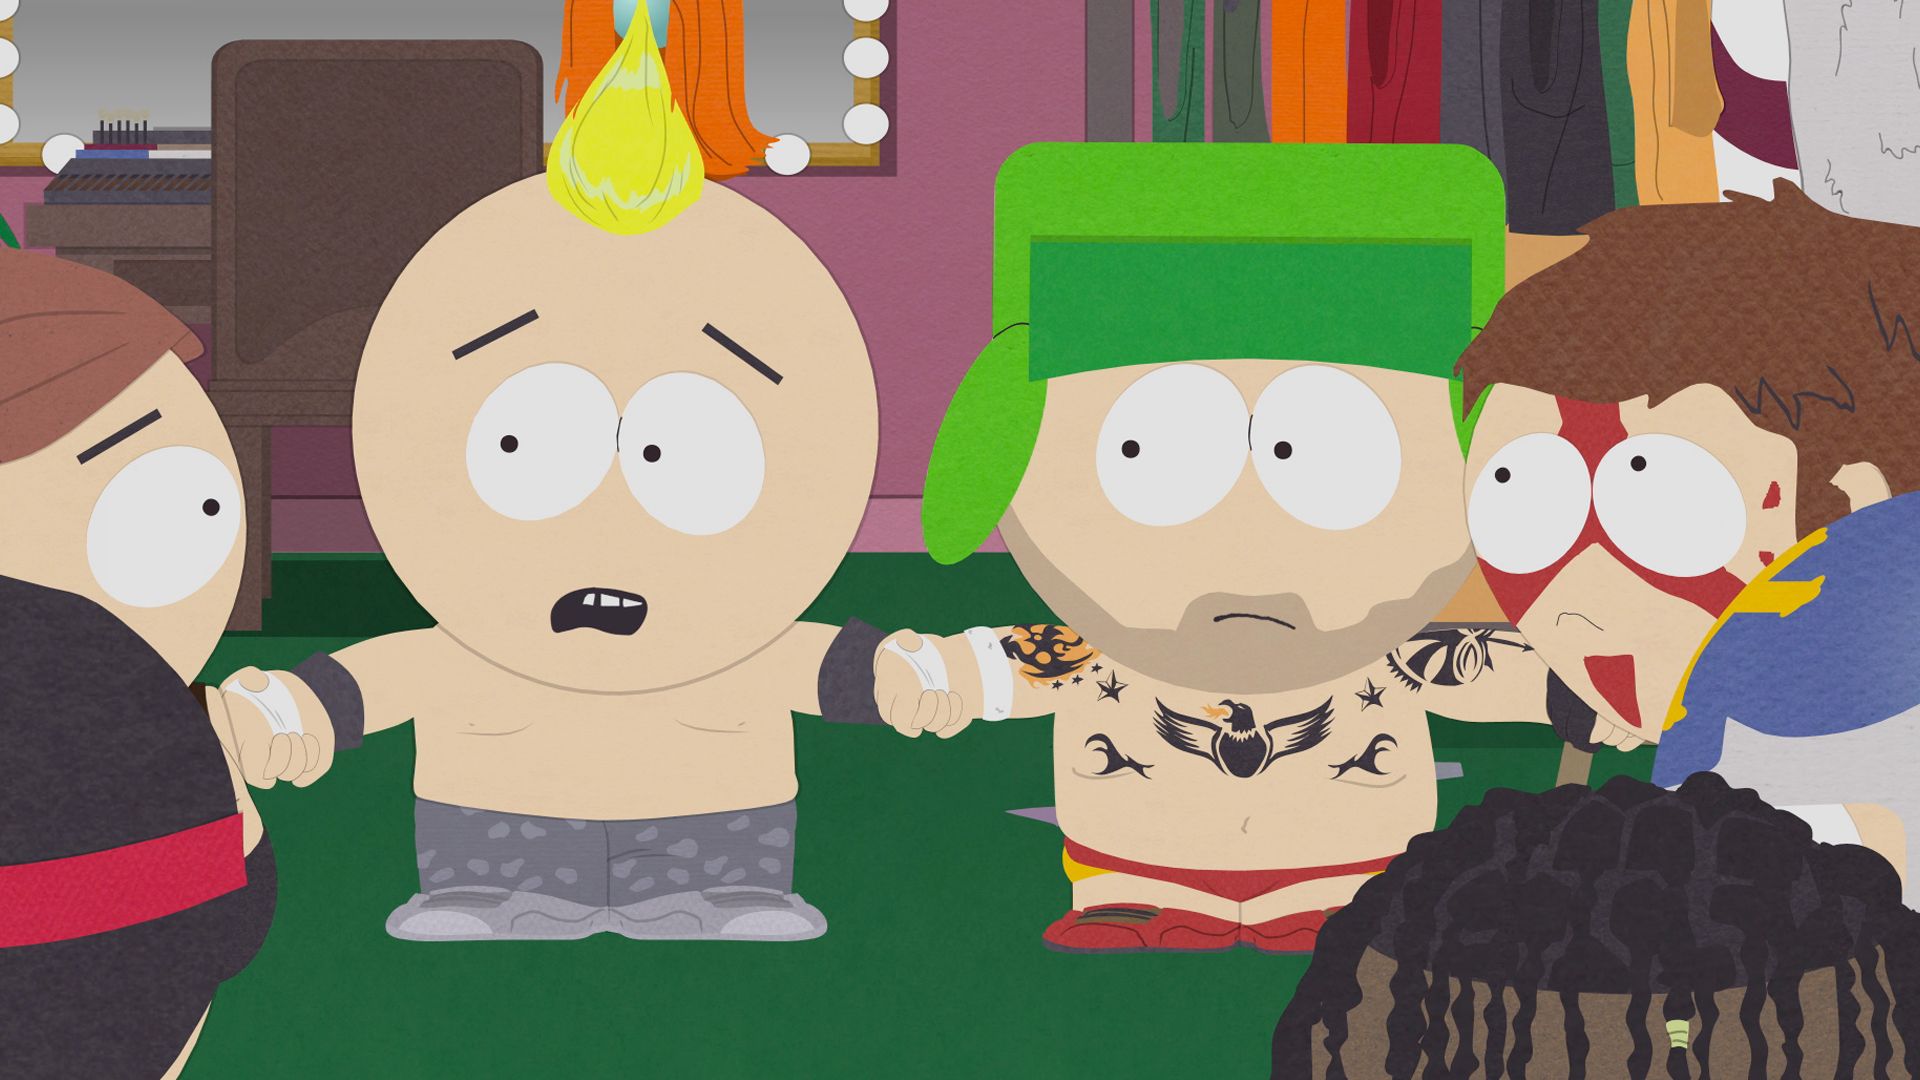 Stir with the Excitement of Violence - Seizoen 13 Aflevering 10 - South Park